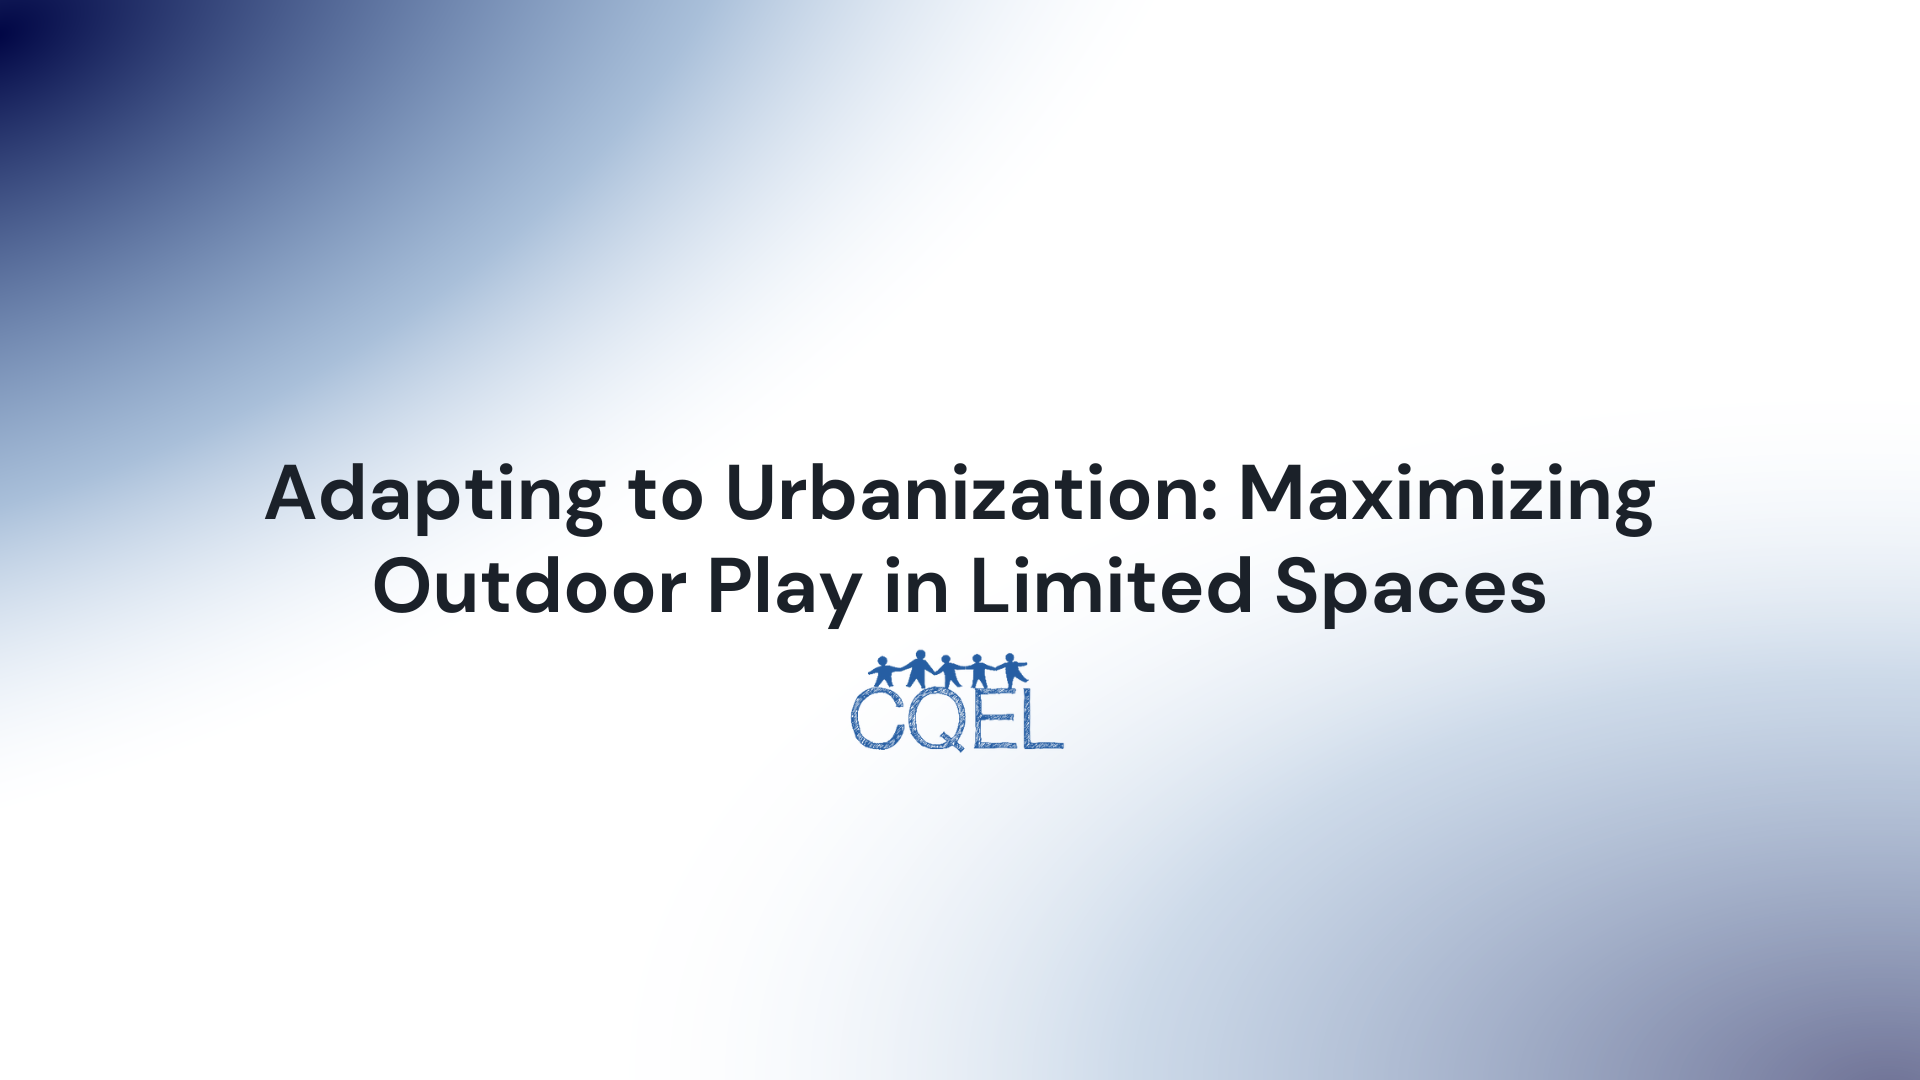 Adapting to Urbanization: Maximizing Outdoor Play in Limited Spaces